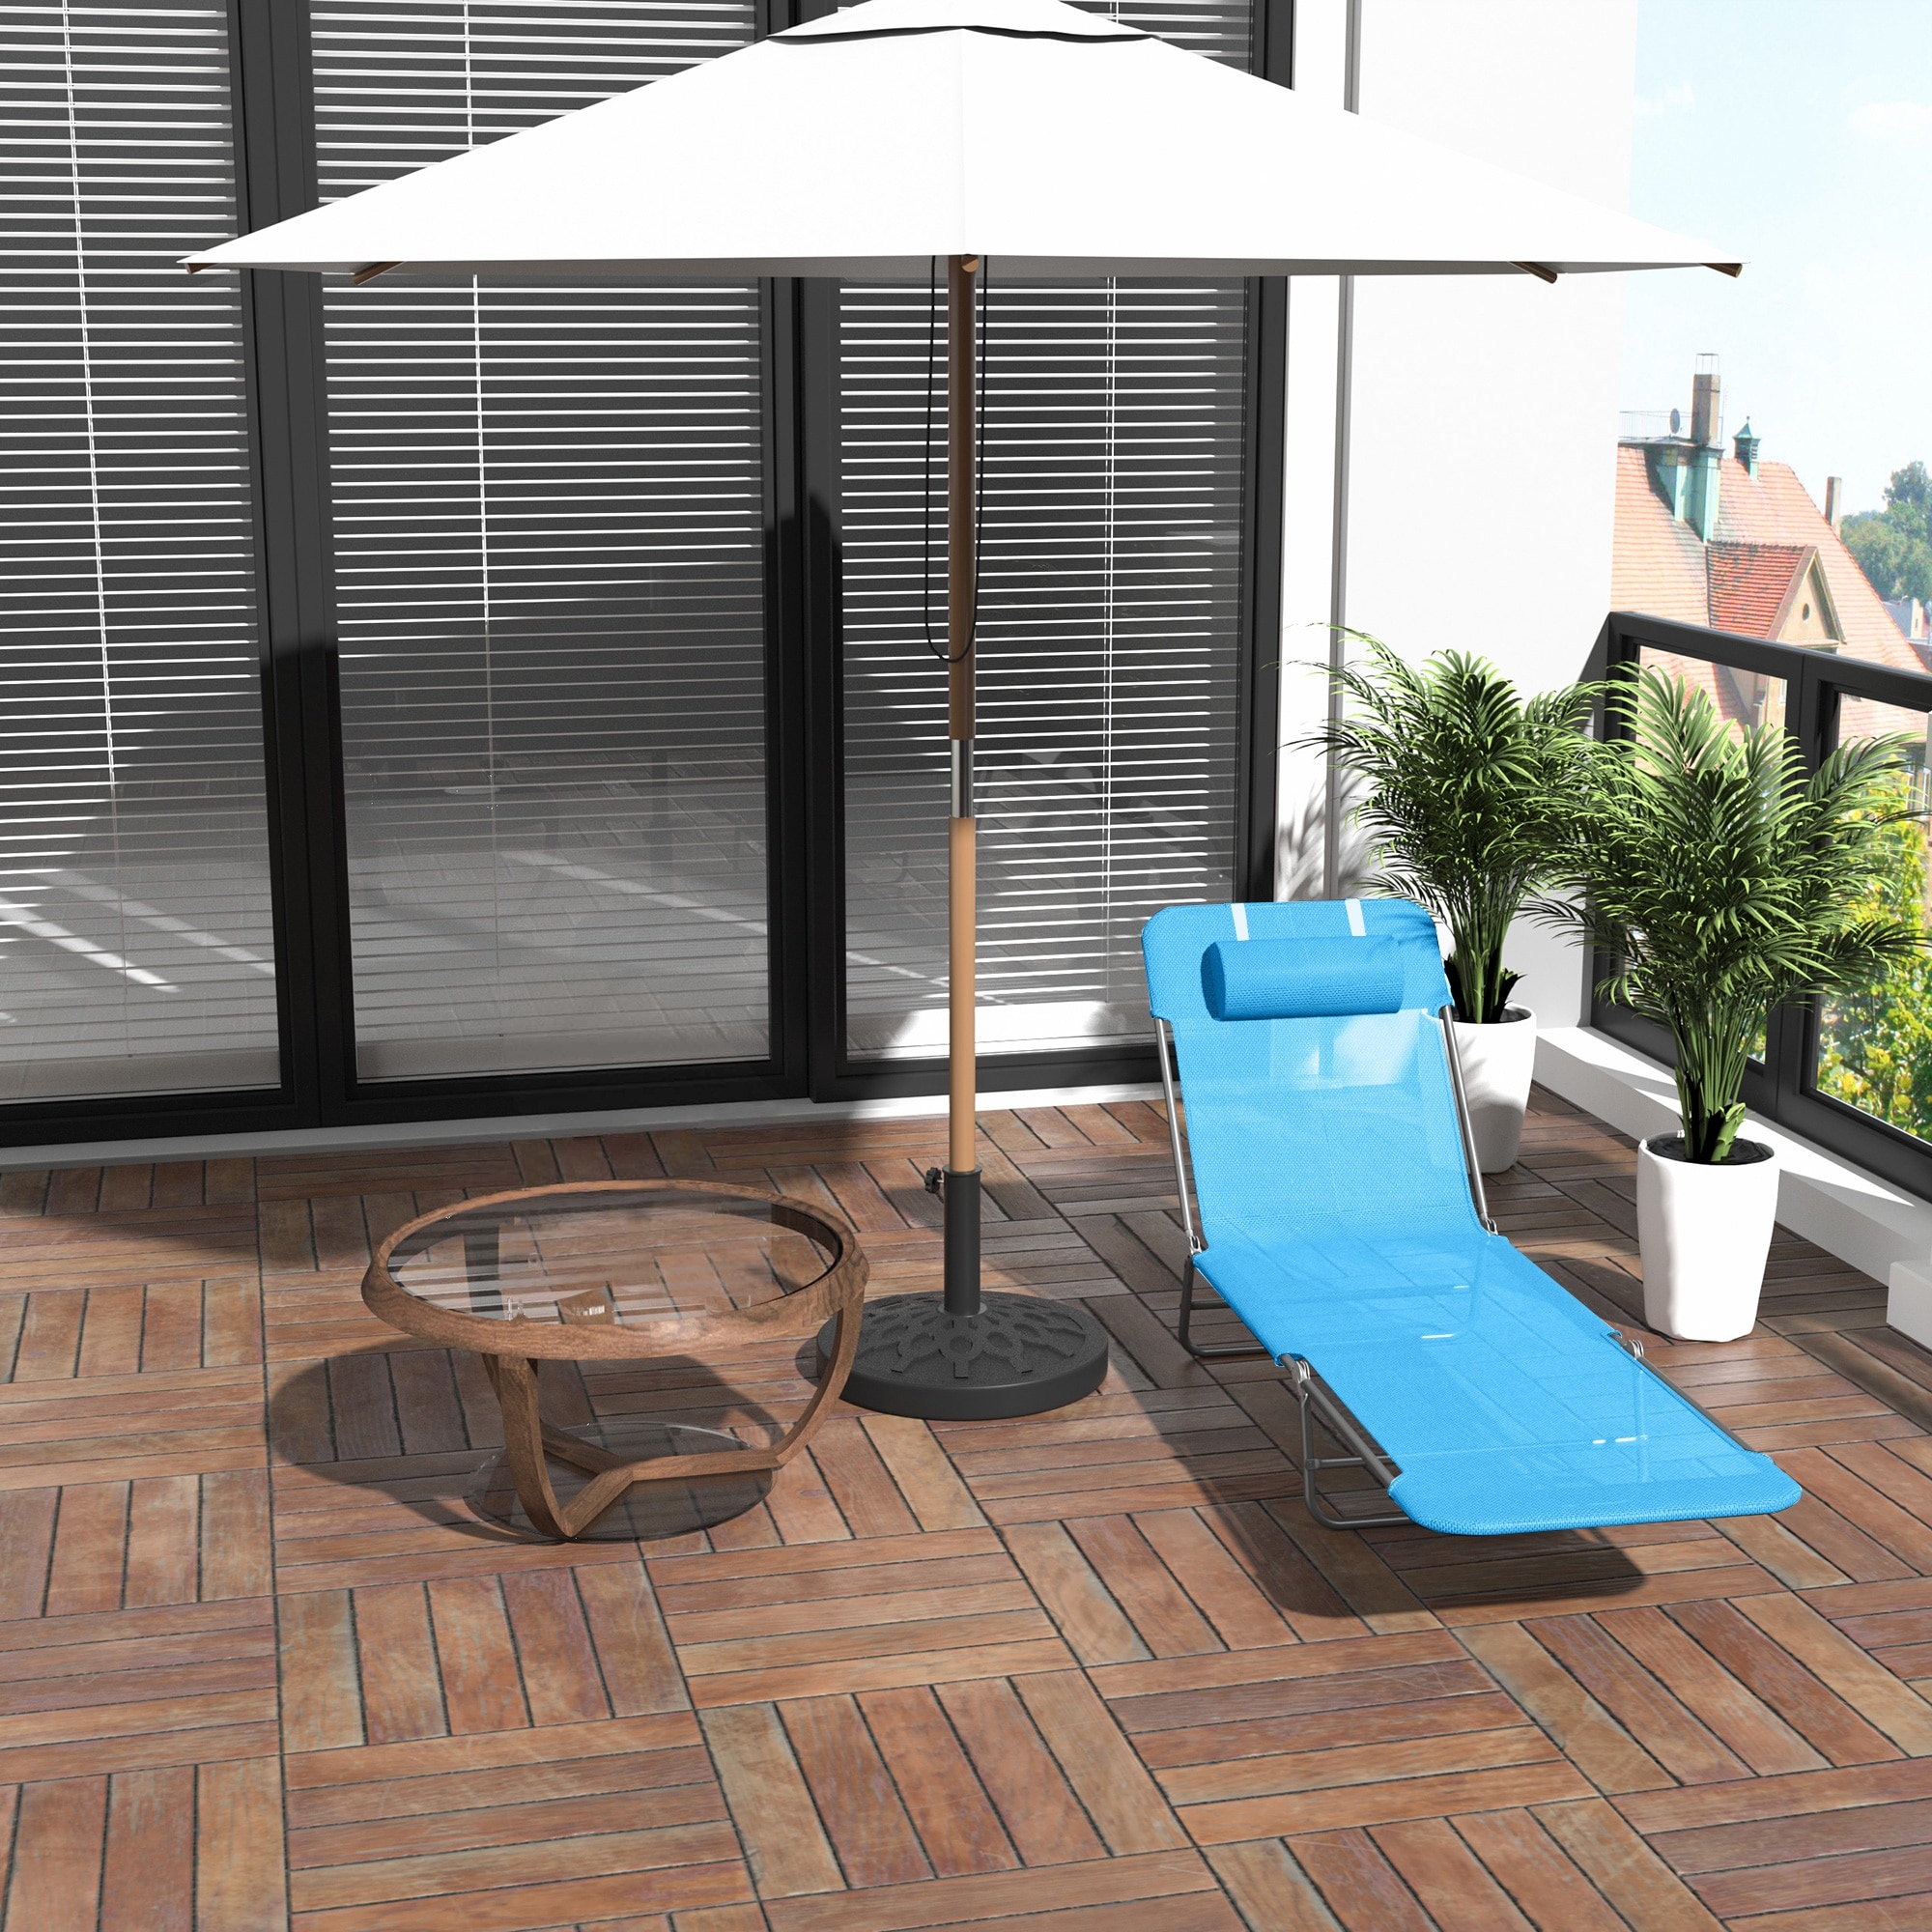 https://ak1.ostkcdn.com/images/products/is/images/direct/42019ba557100fd234739c605140d261a2be2291/Outsunny-Portable-Sun-Lounger%2C-Folding-Chaise-Lounge-Chair-w--Adjustable-Backrest-%26-Pillow-for-Beach%2C-Poolside-and-Patio%2C-Blue.jpg